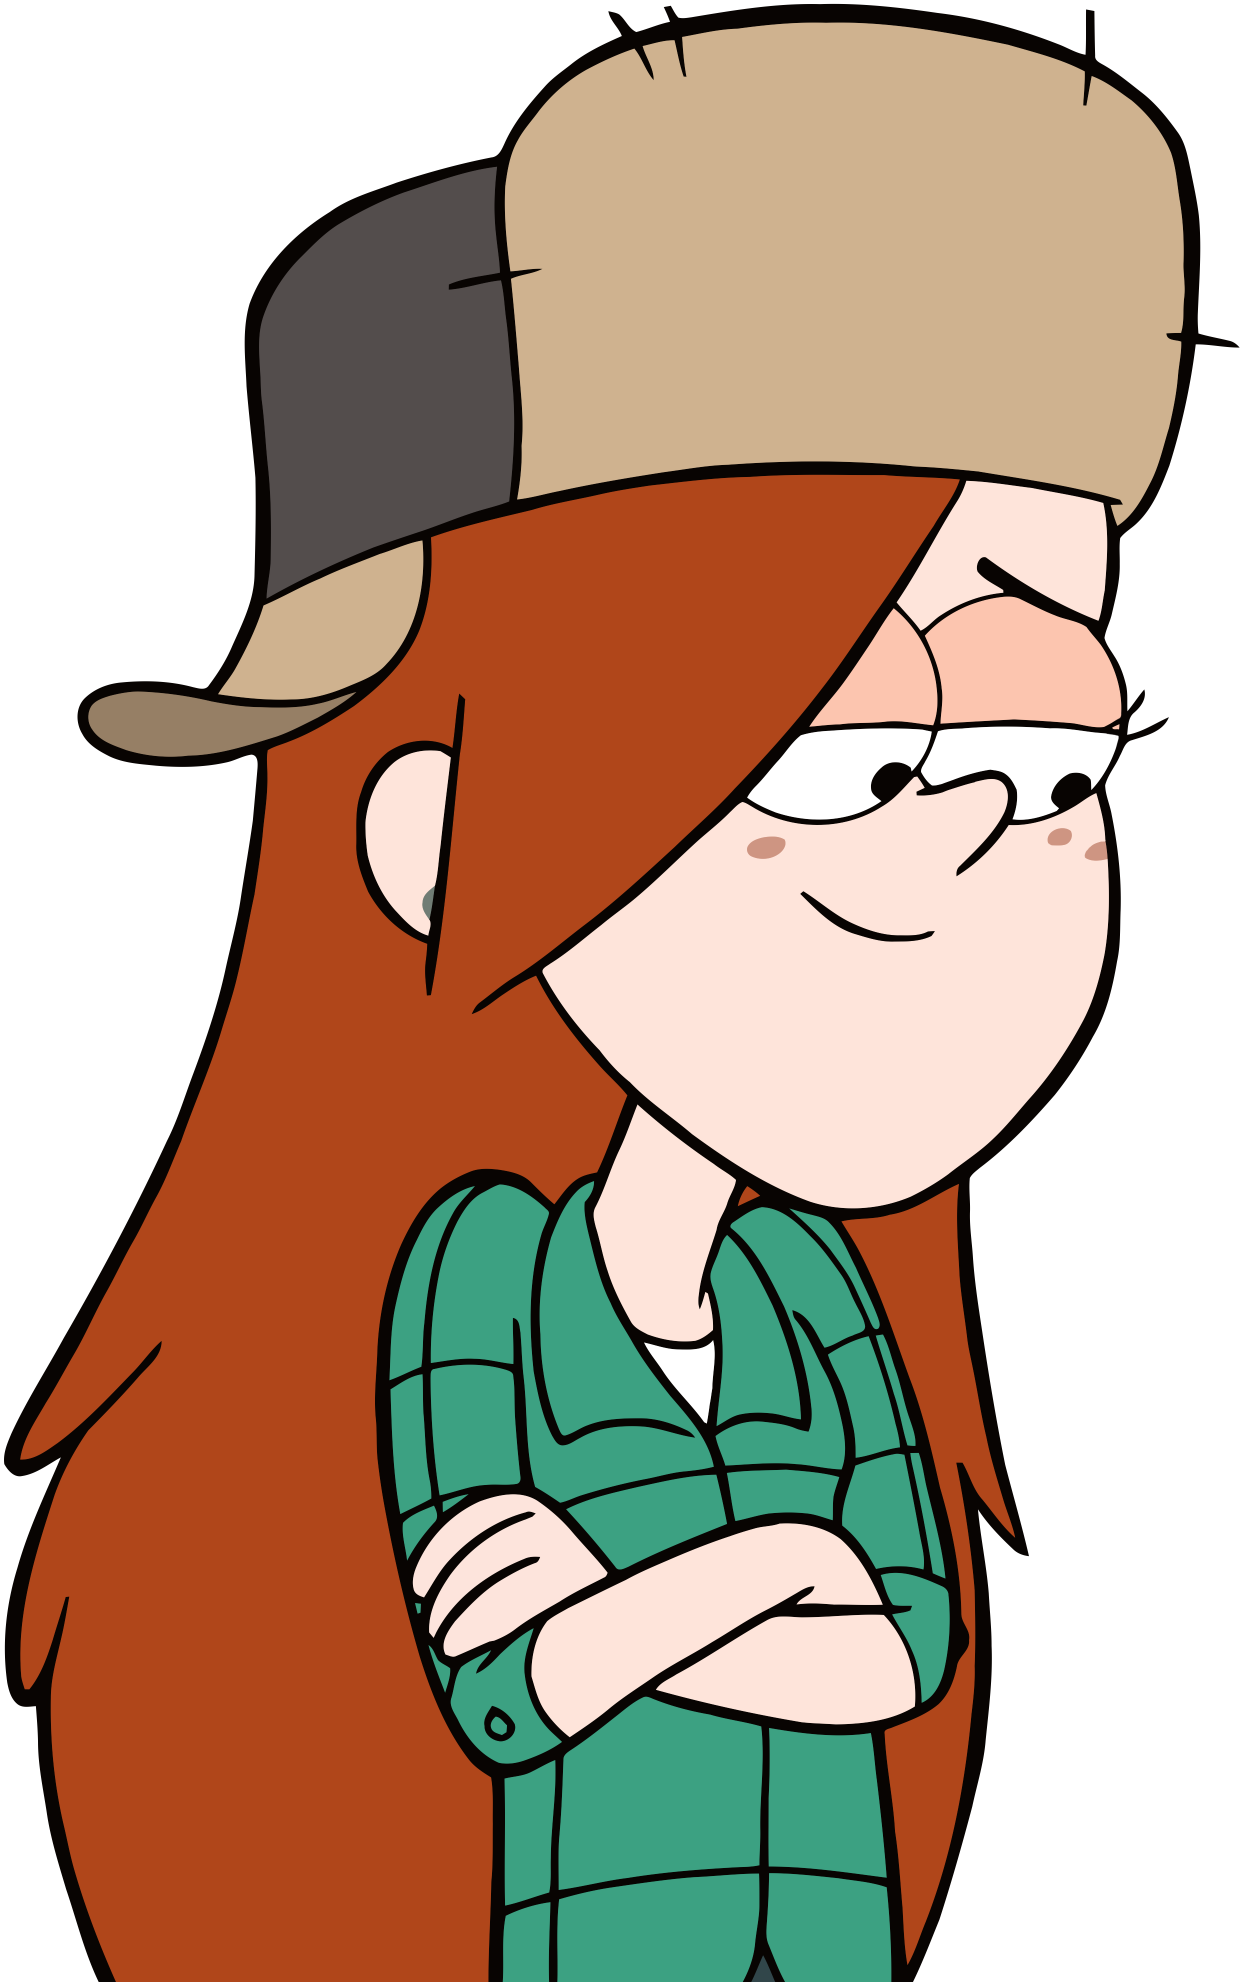 Image - S1e1 - Wendy - Transparent - 04.png | Gravity Falls Wiki ...